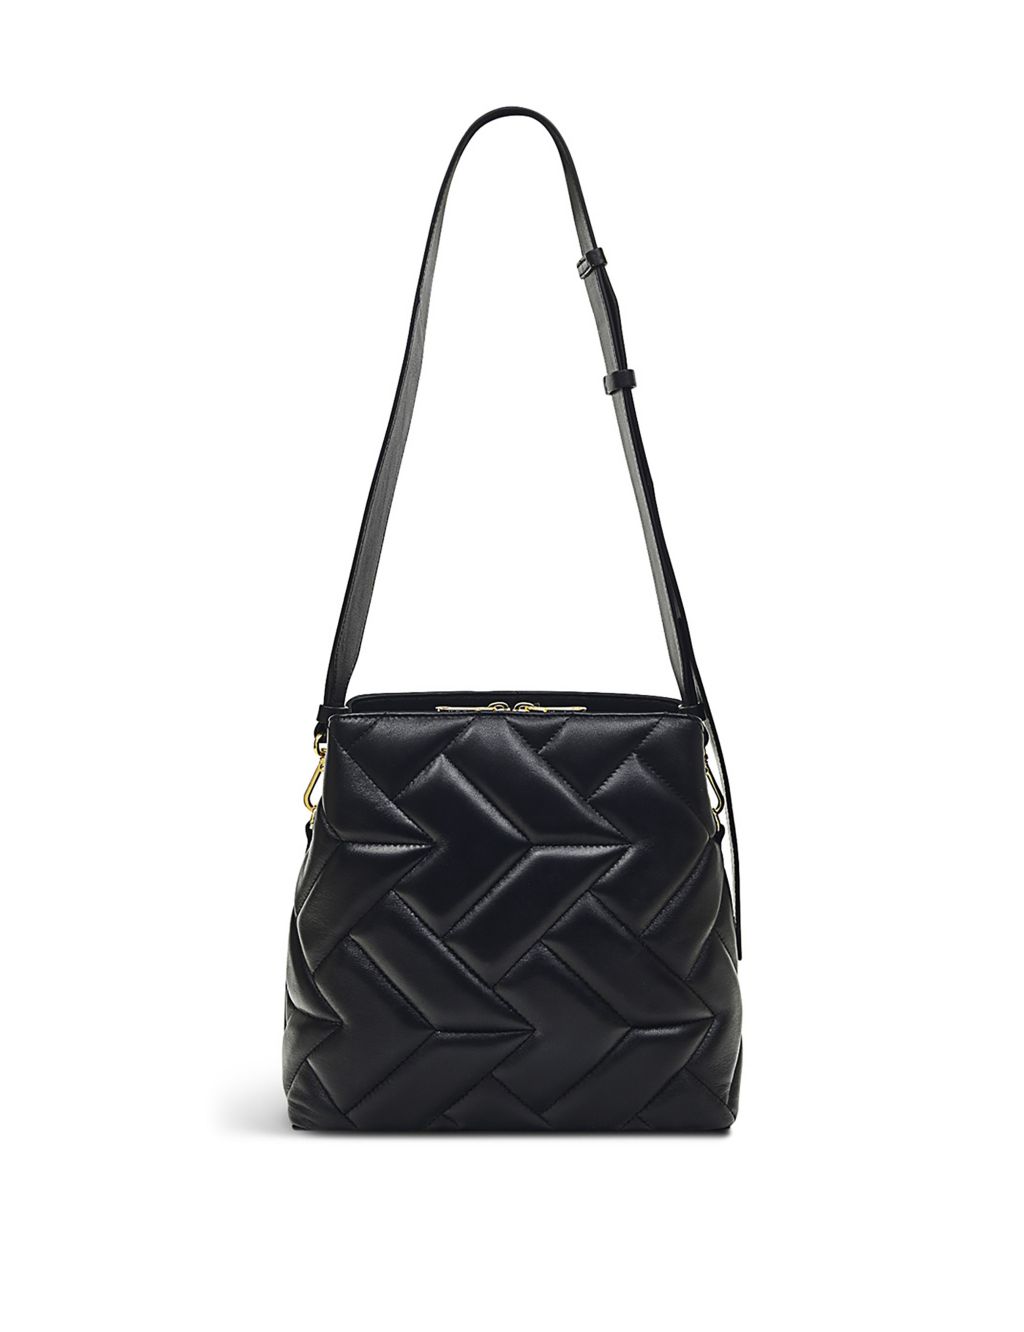 Dukes Place Leather Quilted Cross Body Bag image 4